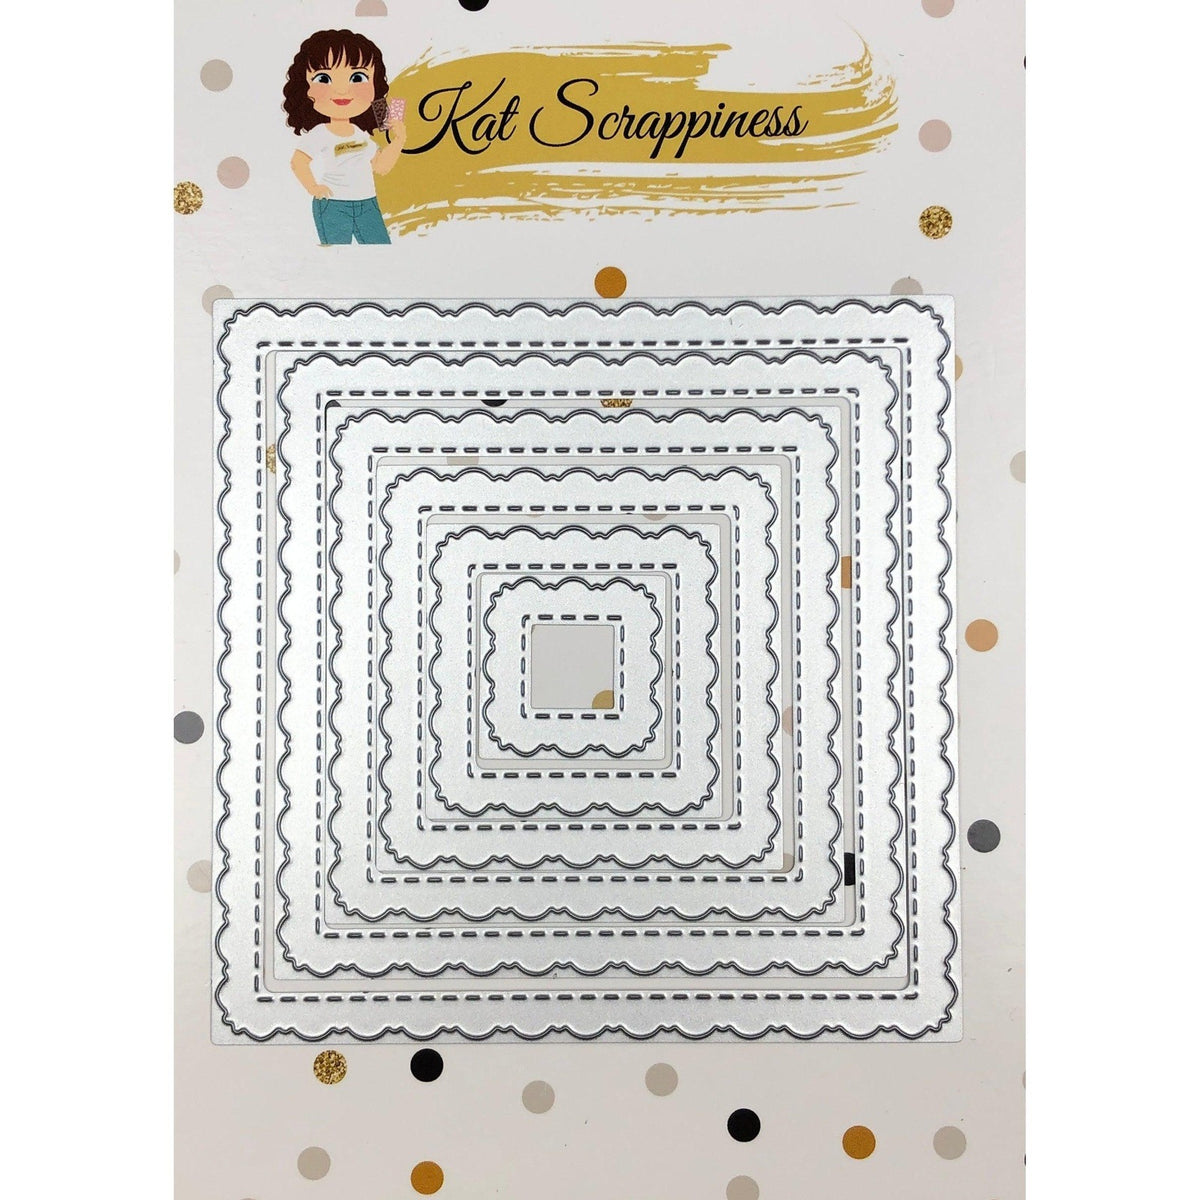 Stitched Fancy Scalloped Square Dies by Kat Scrappiness - Kat Scrappiness